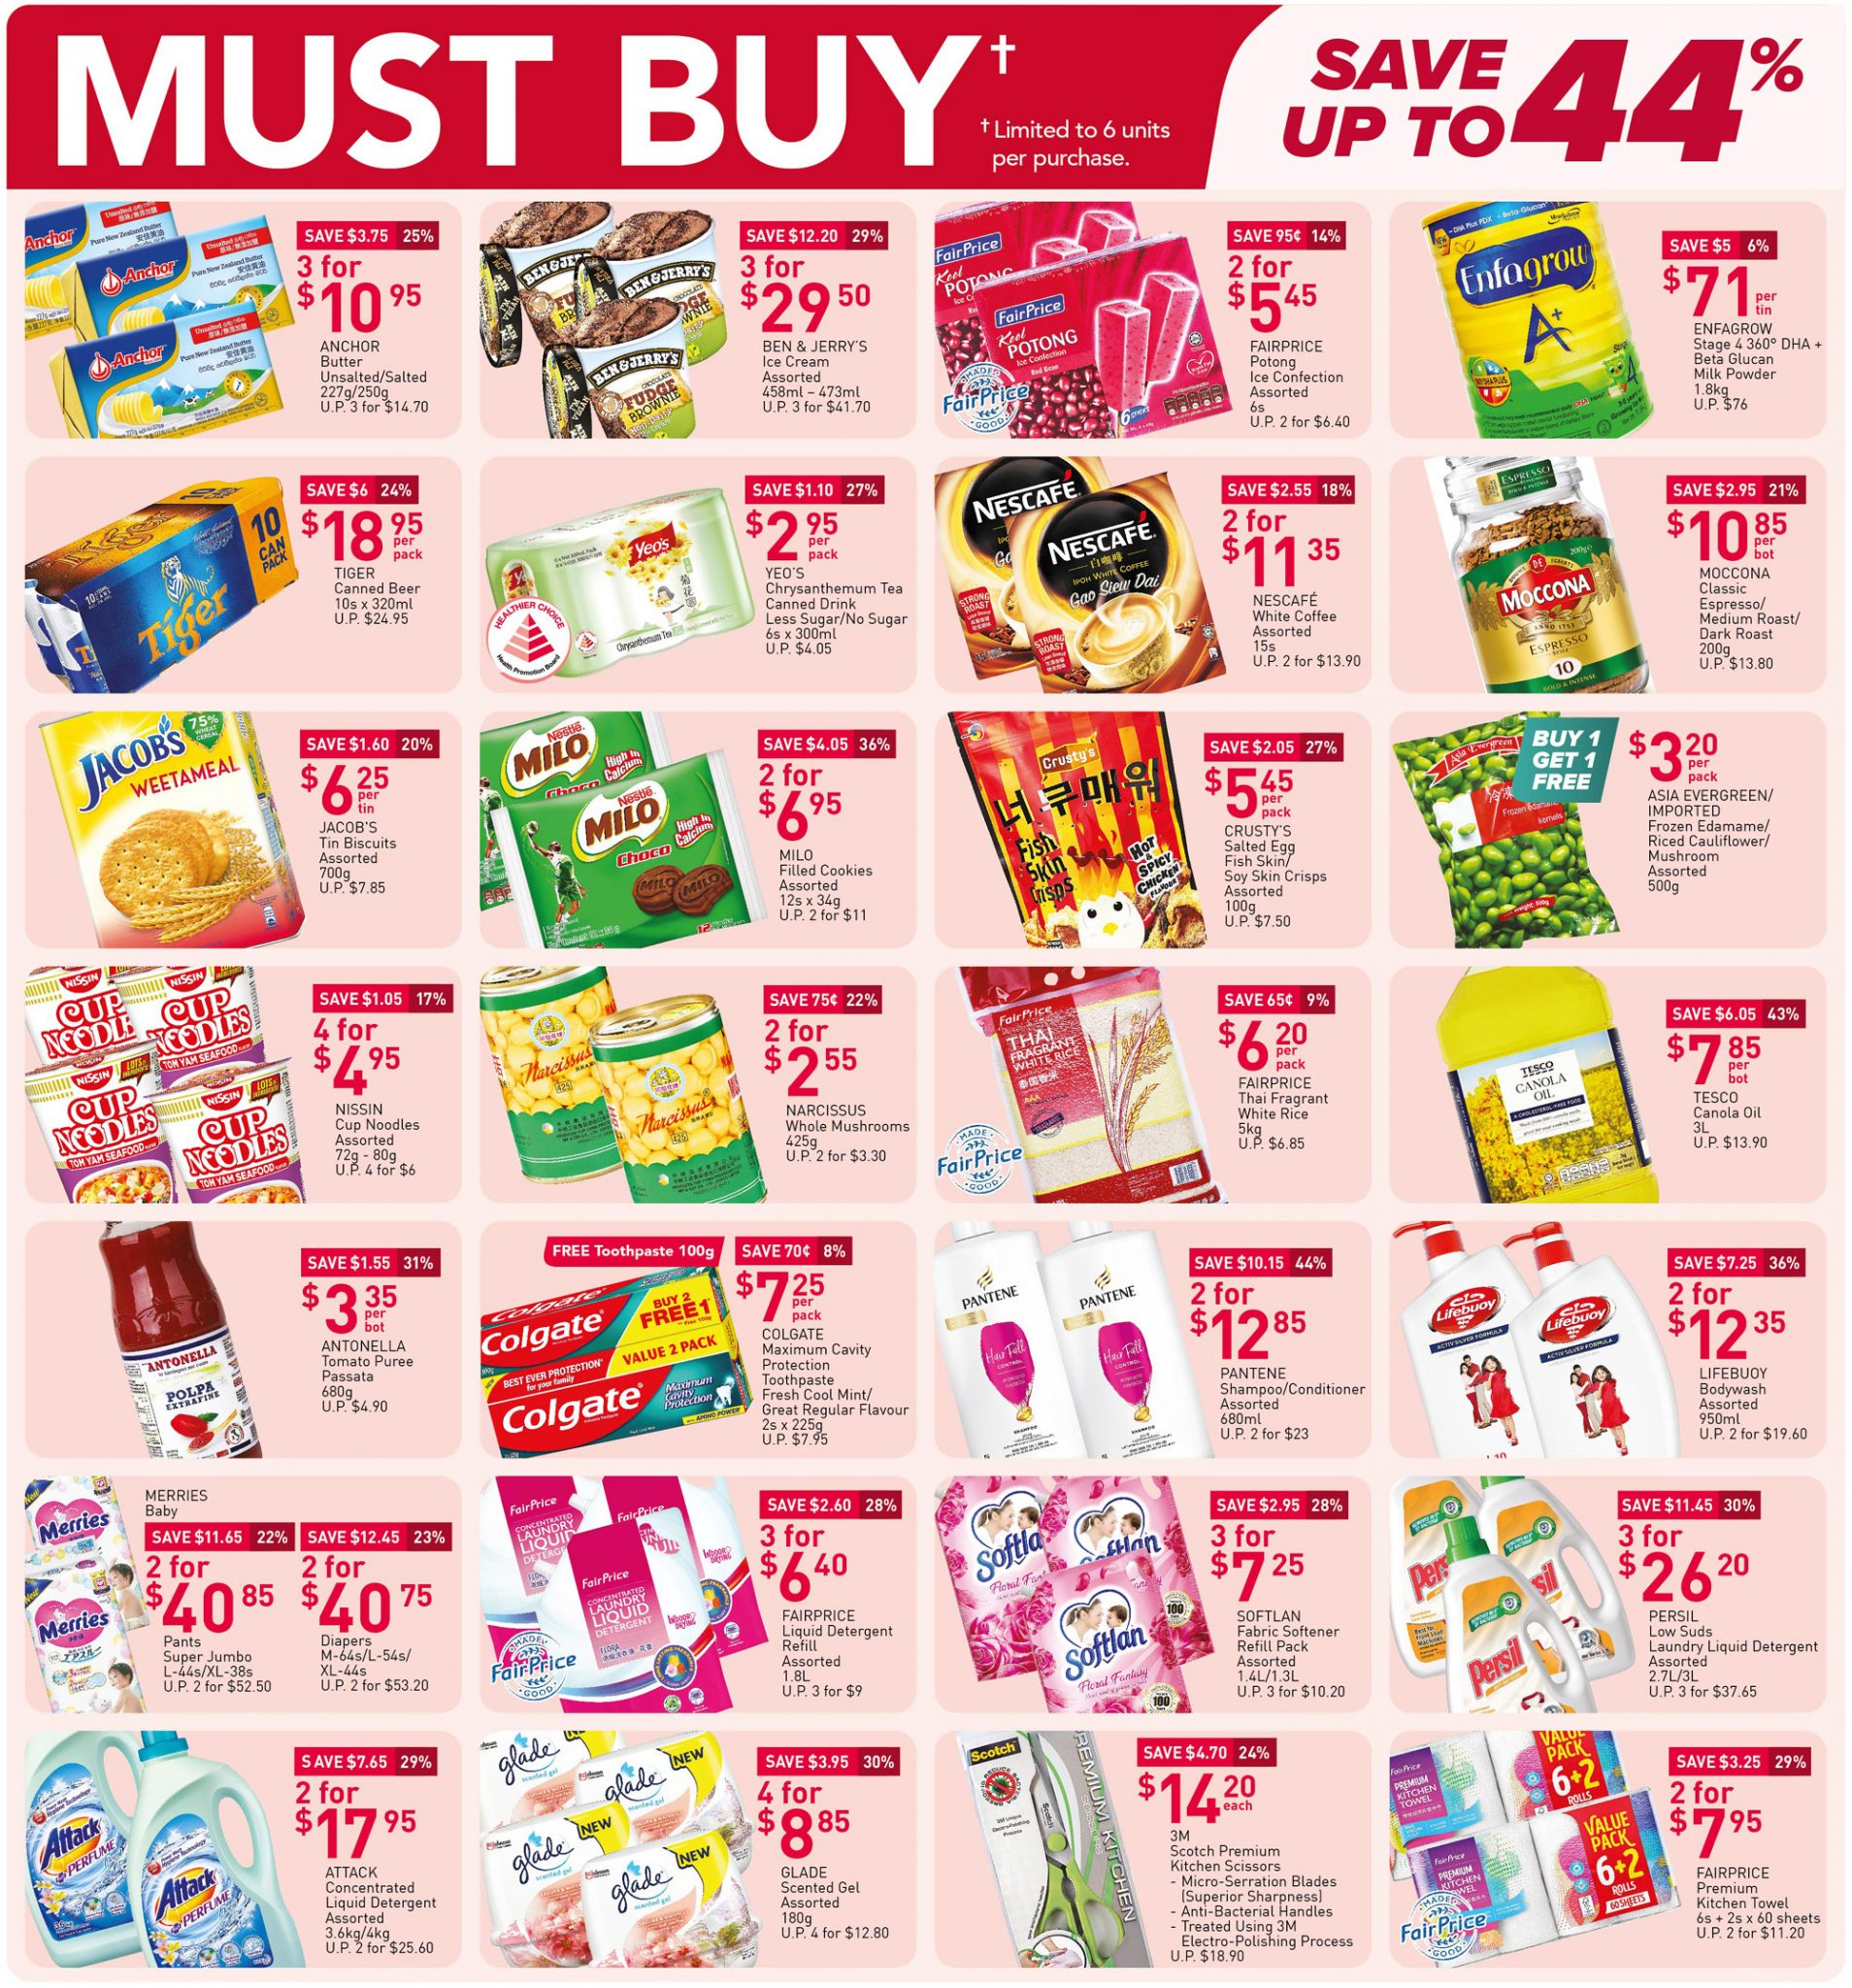 Must-buy items from now till 21 April 2021